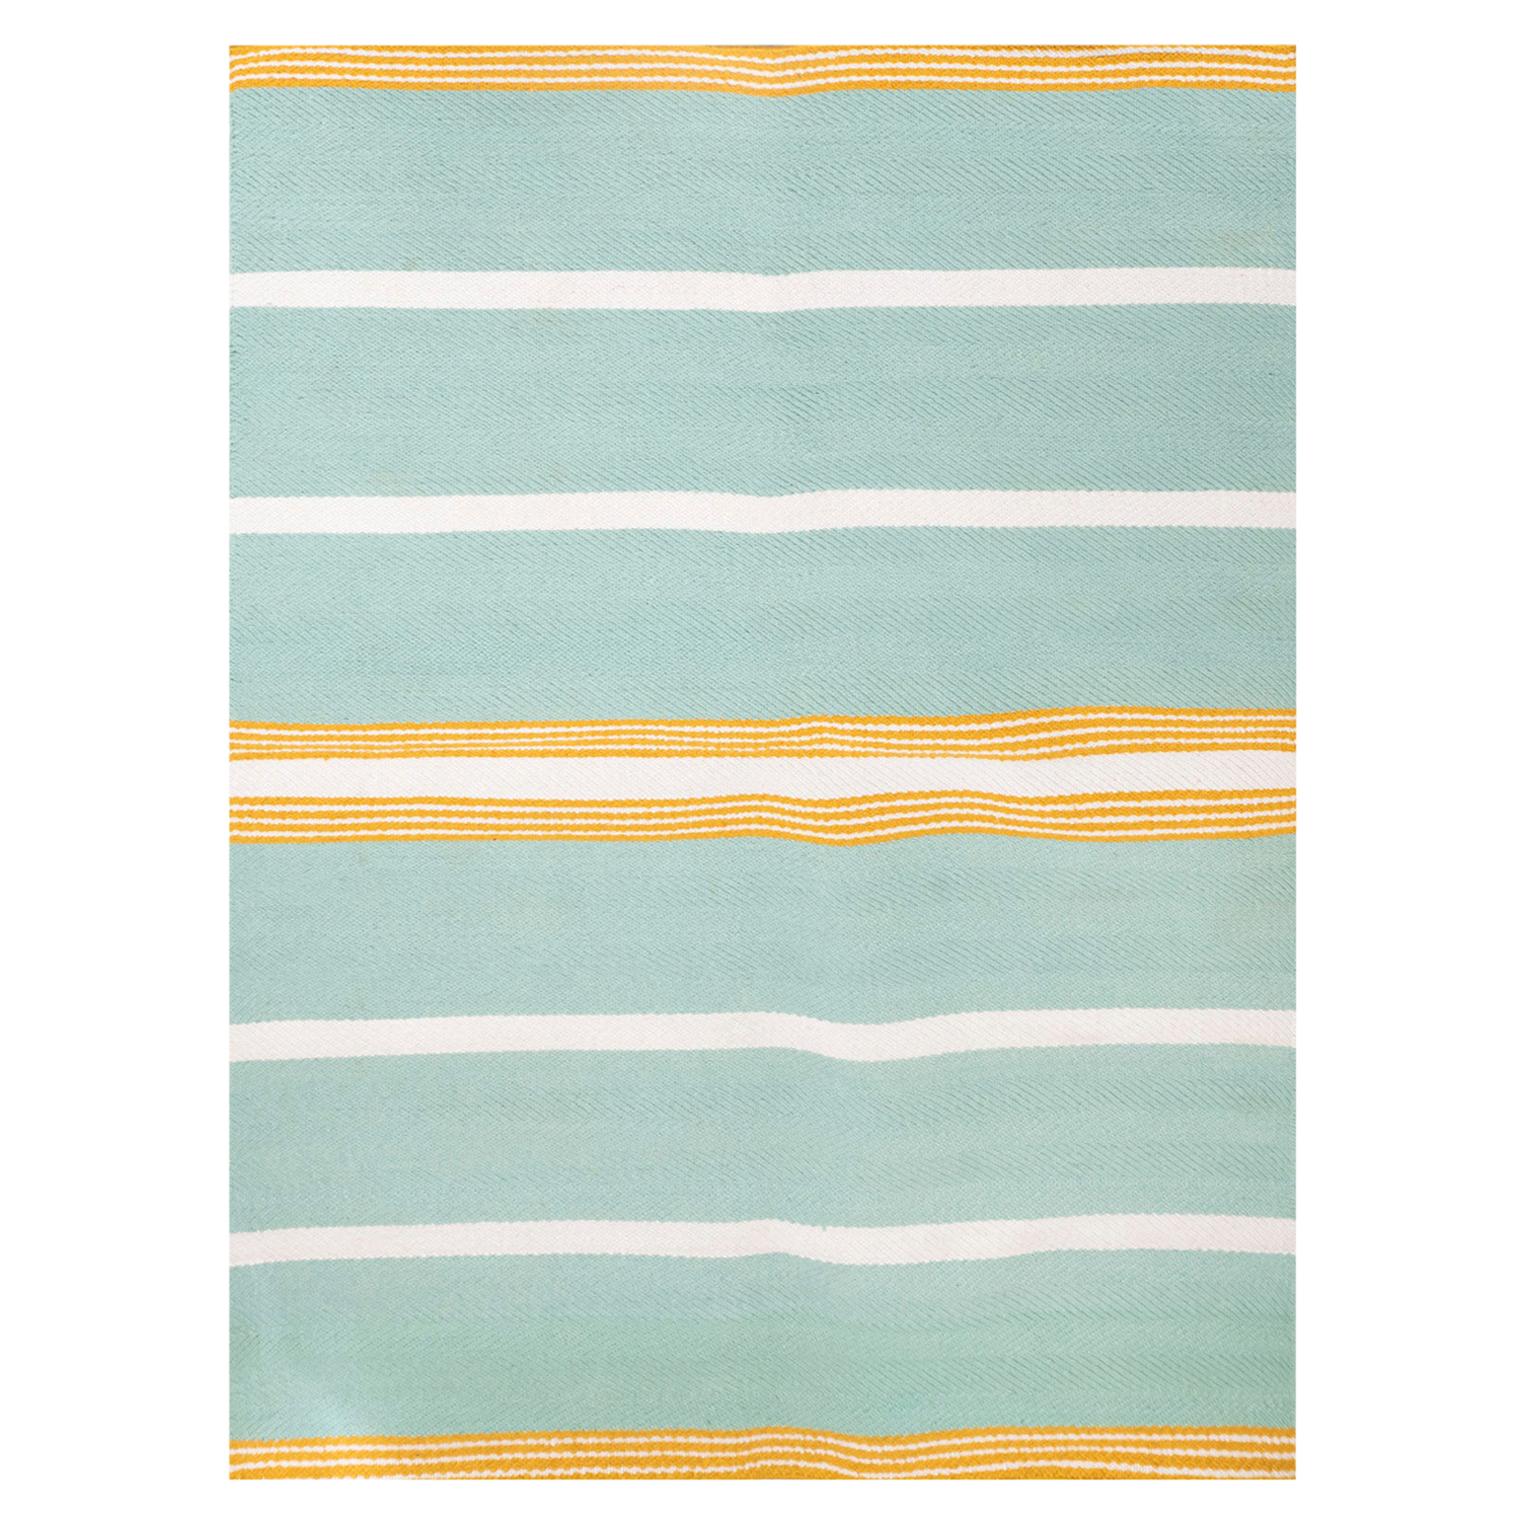 Contemporary Handwoven Polypropylene Outdoor Rug Mustard Turquoise Stripes For Sale